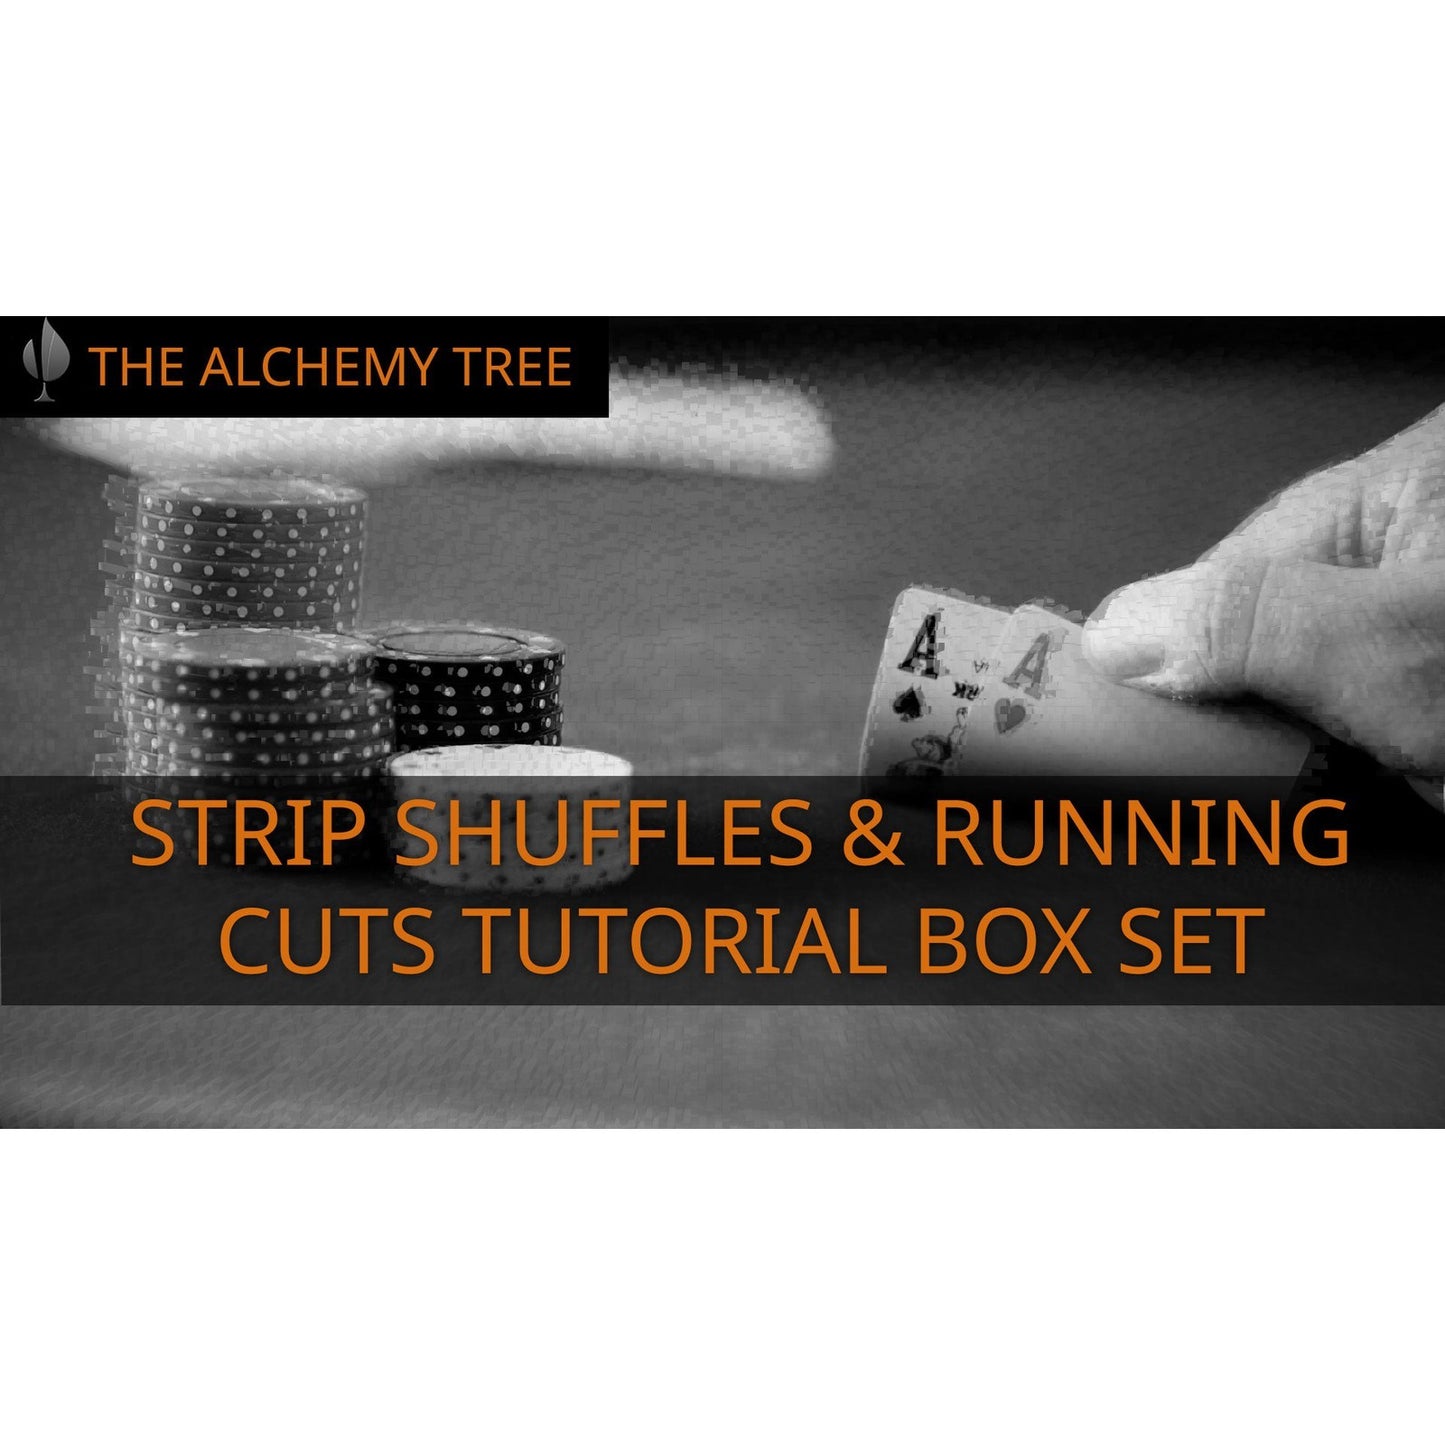 Strip Shuffles and Running Cuts Box Set Alchemy Tree  Left Handed